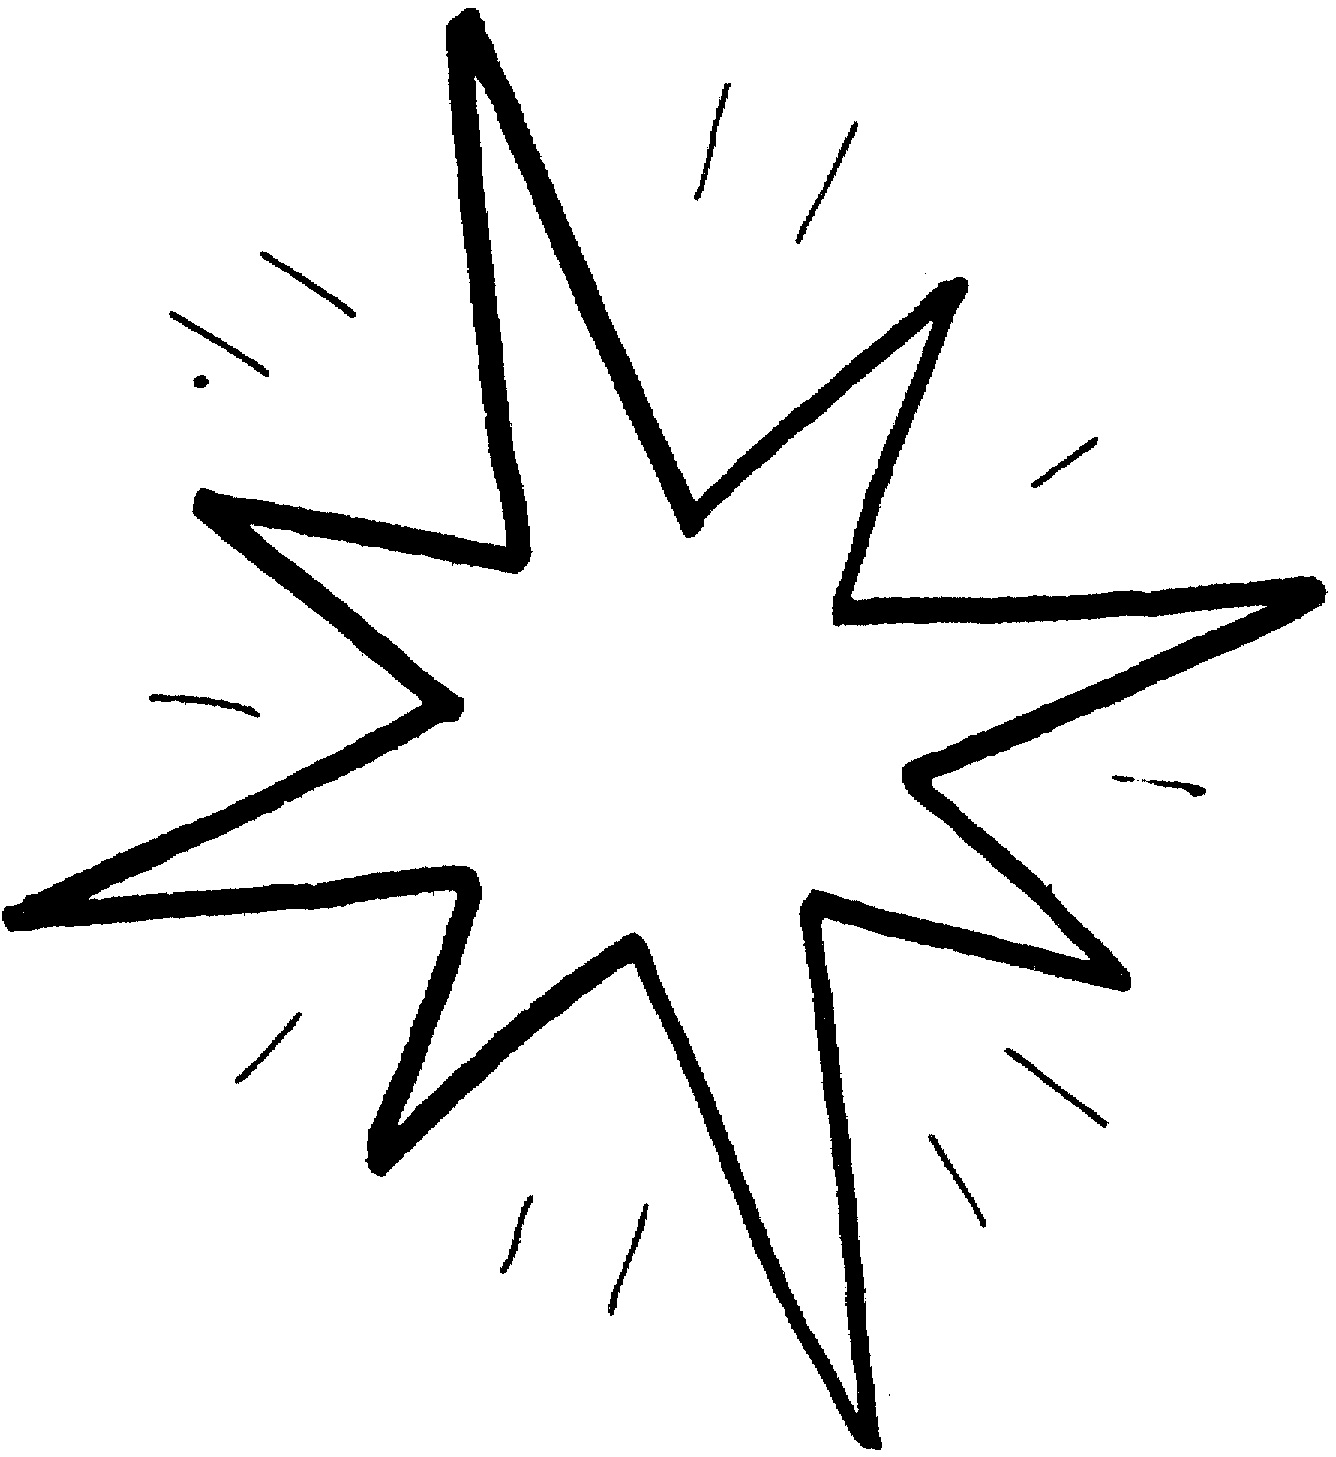 Star Coloring Page
s for childrens printable for free